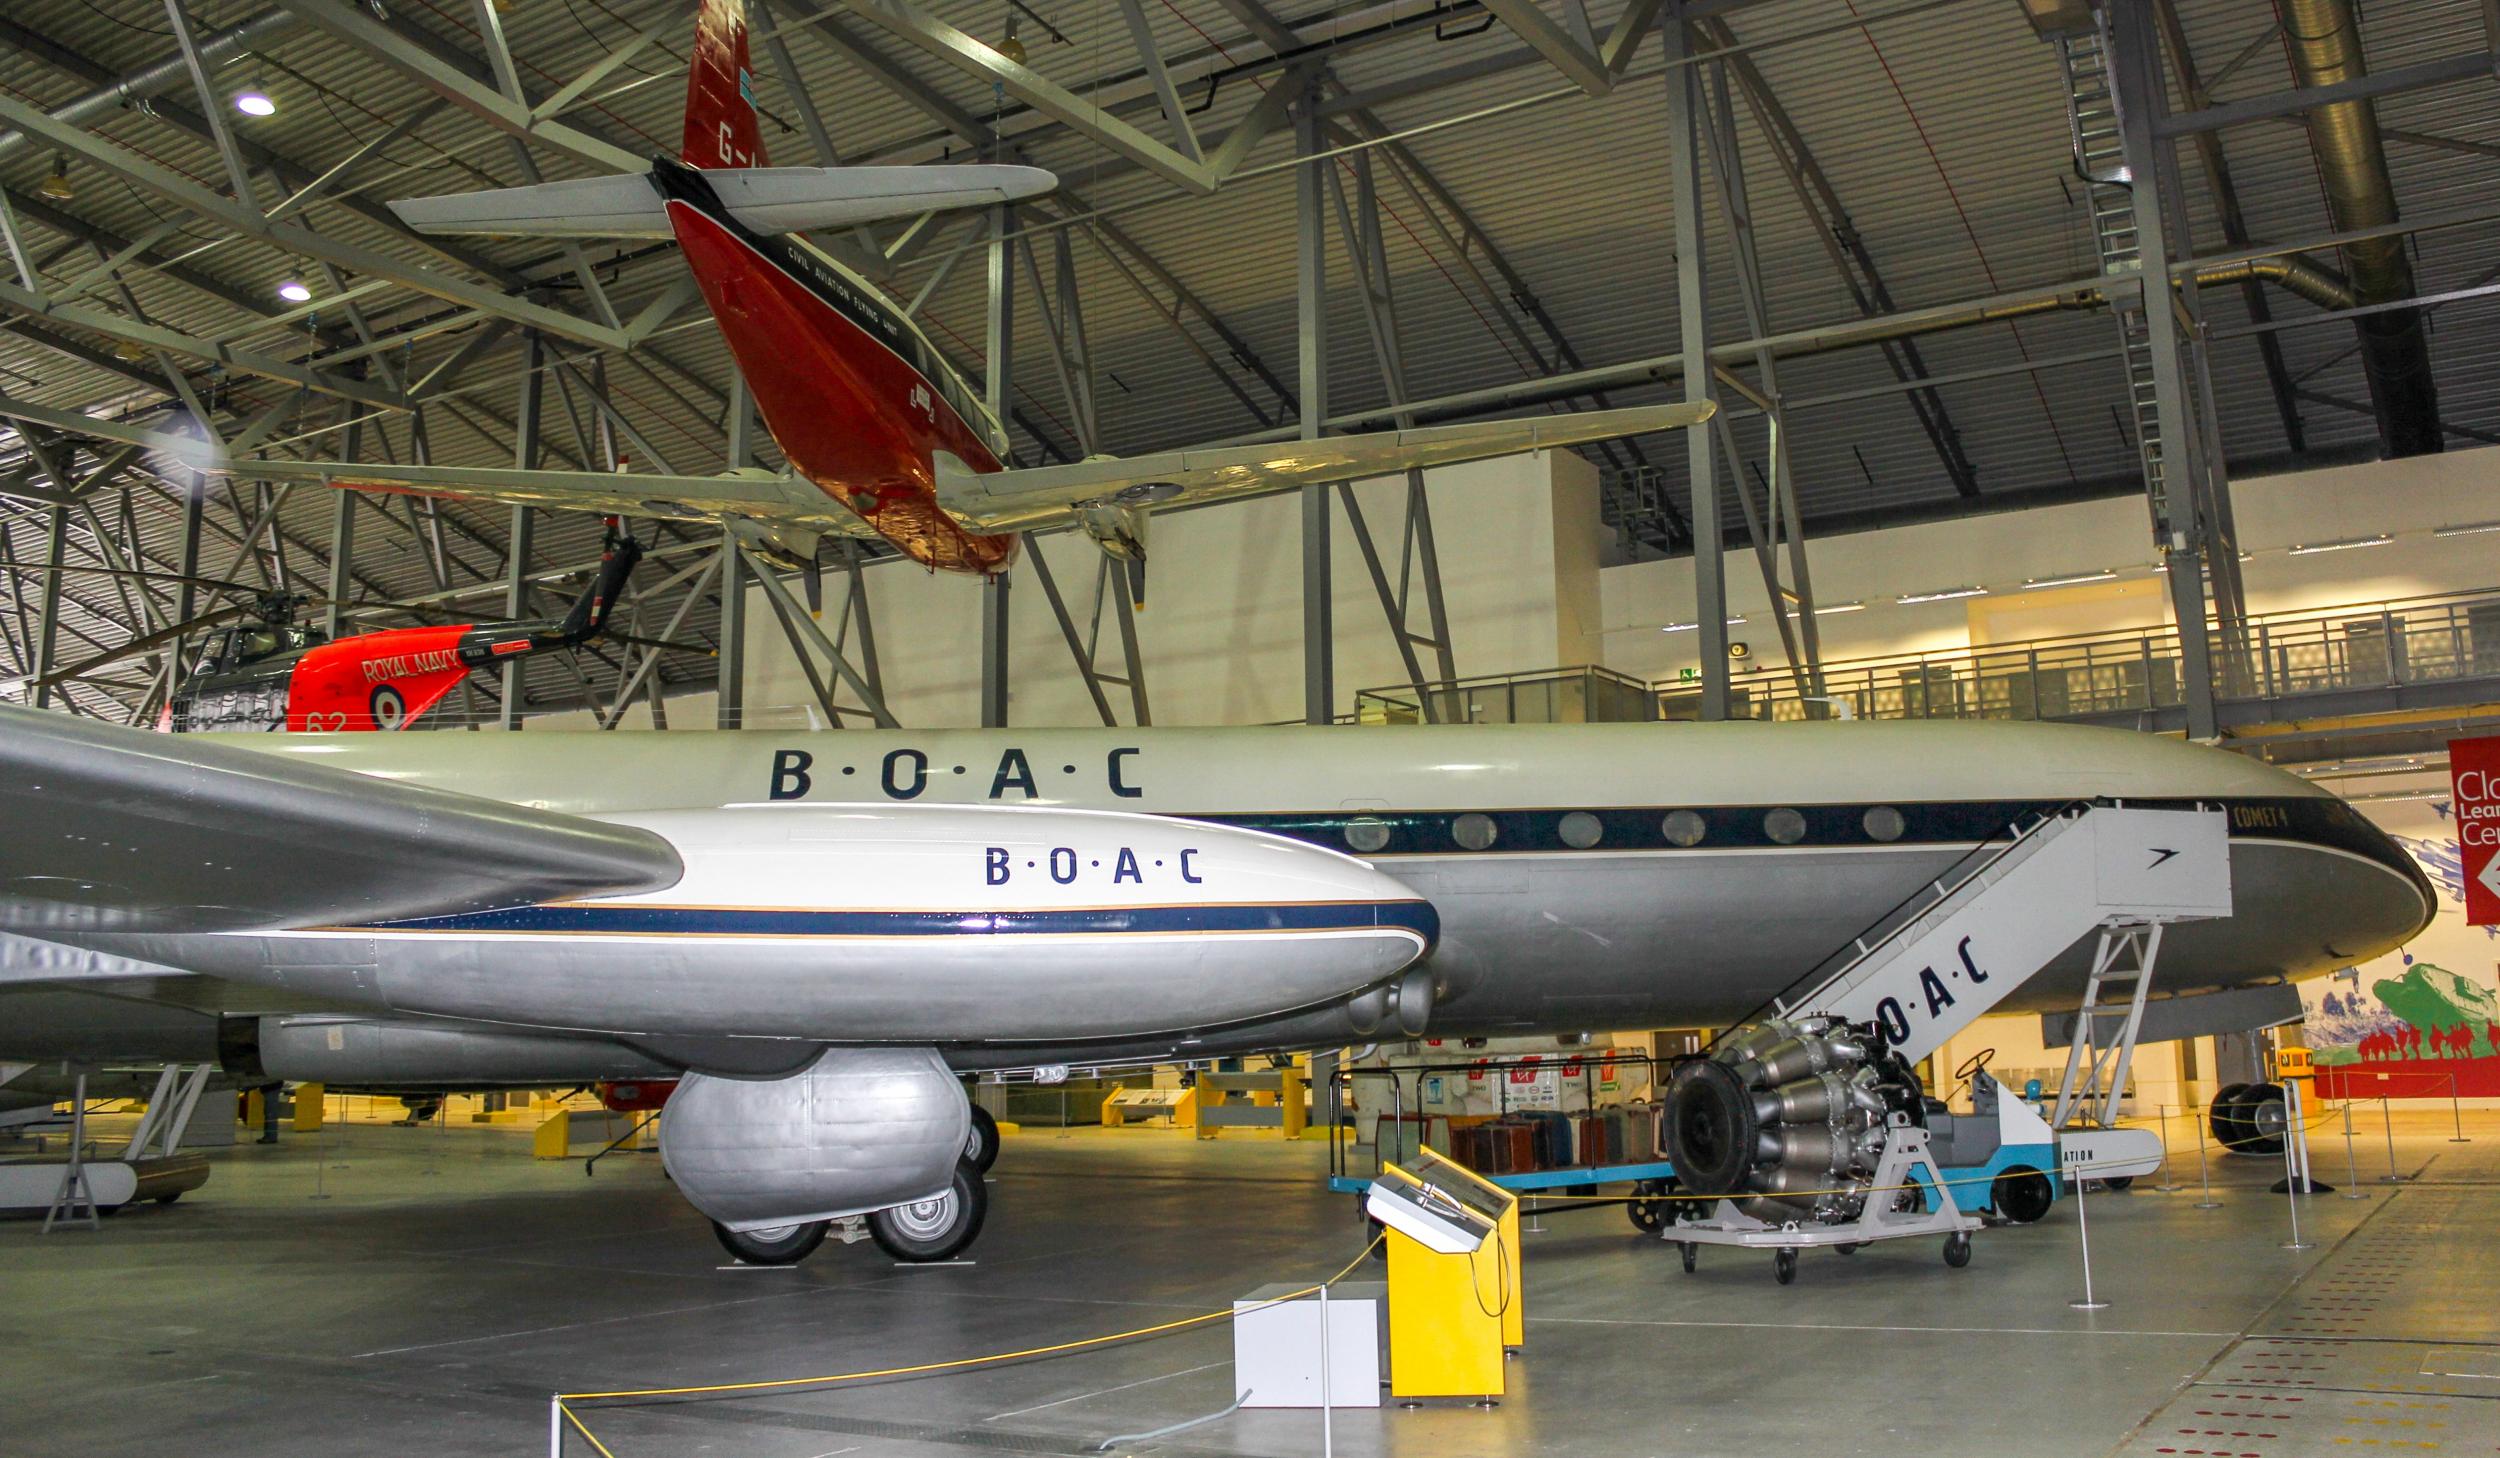 The BOAC Comet is now at Duxford Air Museum